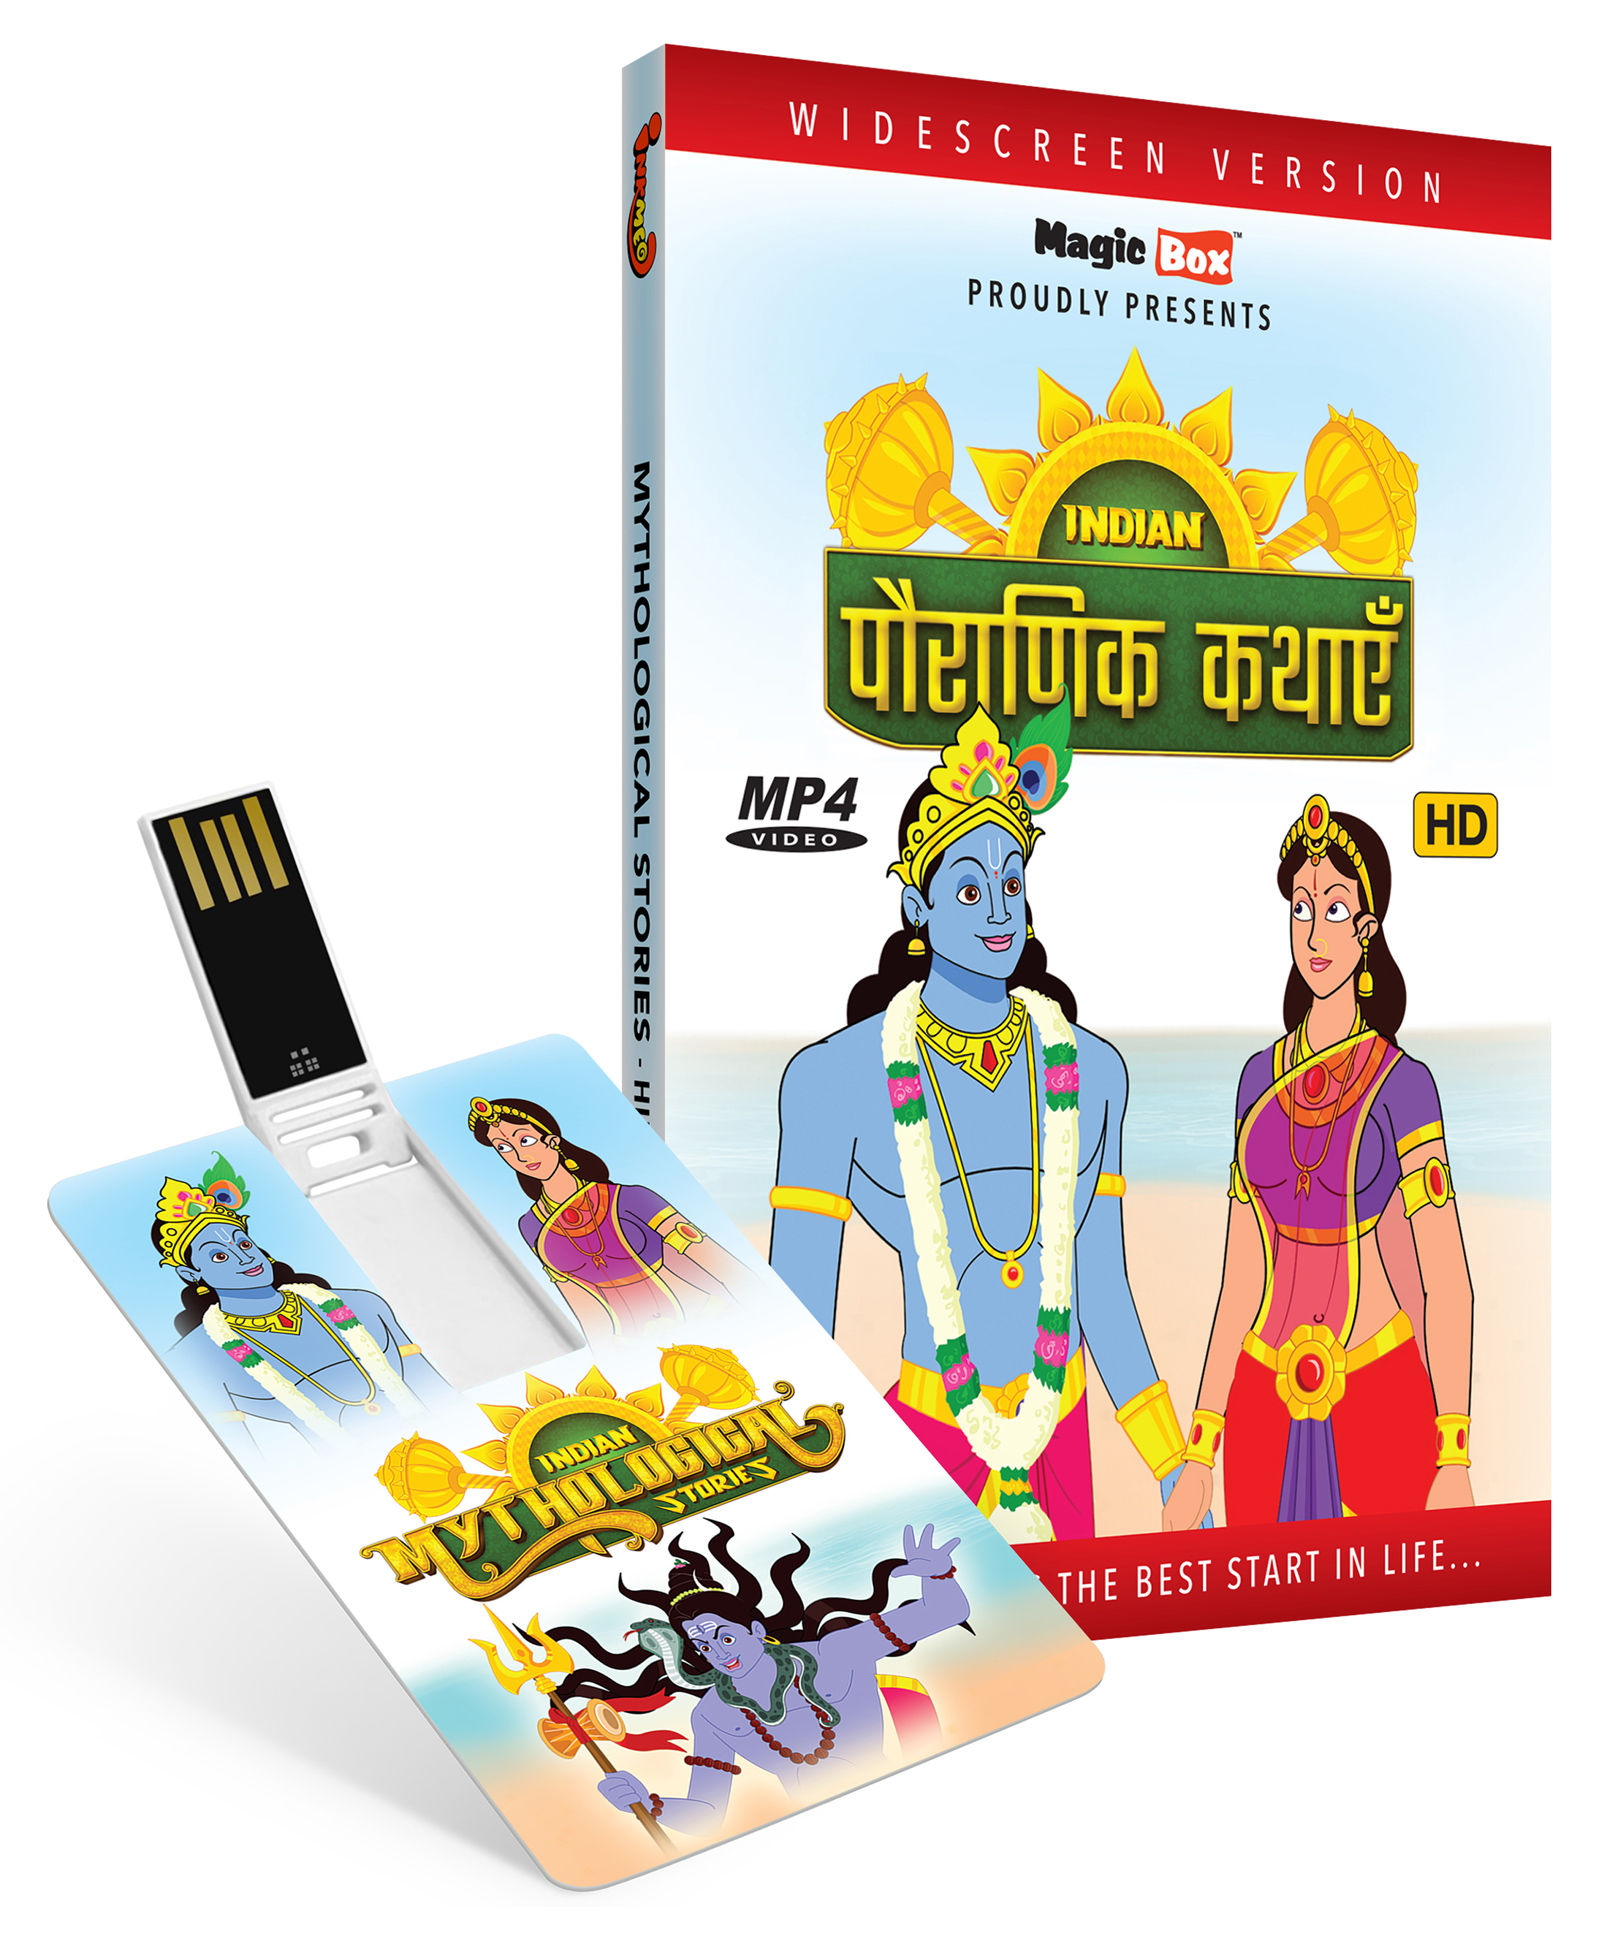 Inkmeo Movie Card Mythological Stories 8GB High Definition MP4 Video USB  Memory Stick - Hindi Online in India, Buy at Best Price from  -  8476792